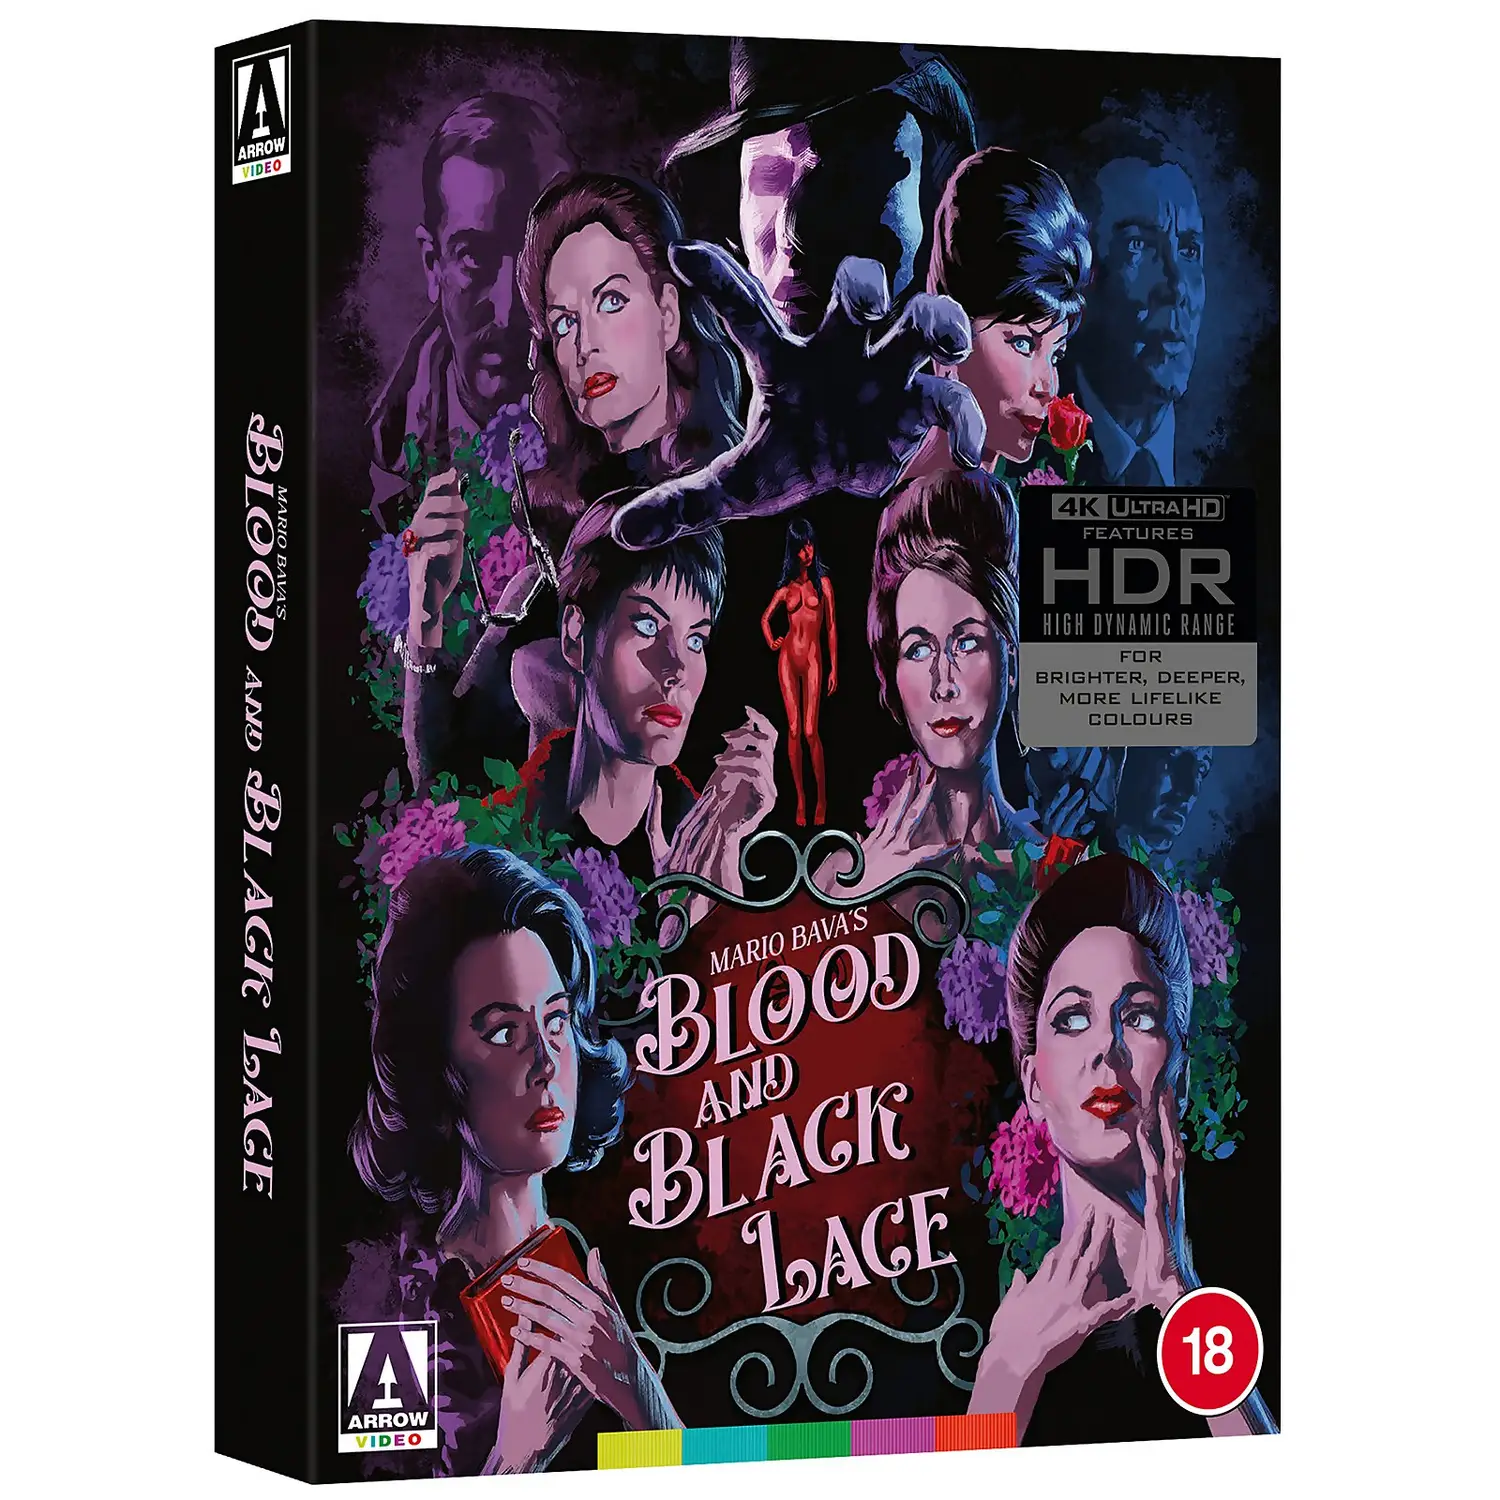 BLOOD AND BLACK LACE BLU RAY